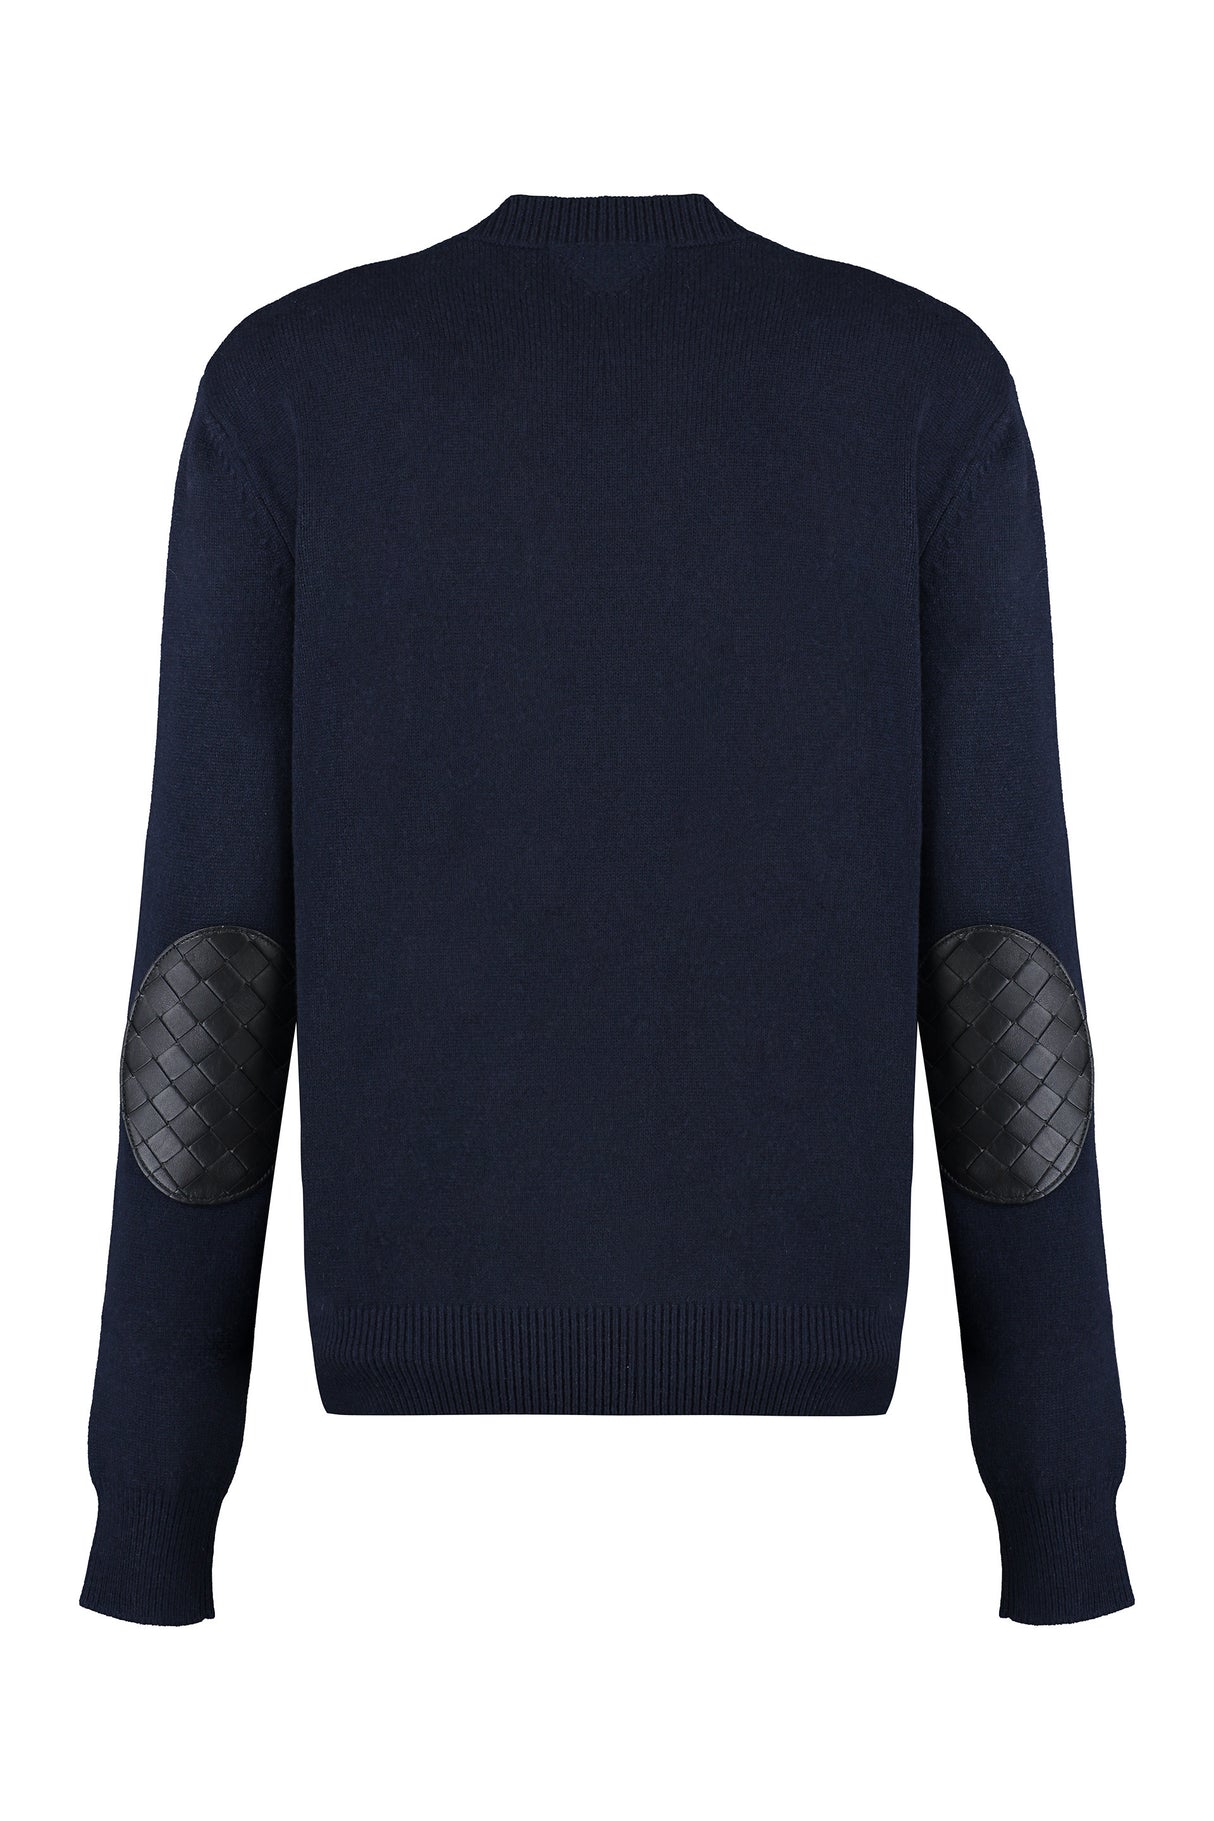 BOTTEGA VENETA Navy Cashmere Sweater with Leather Elbow Patches and Ribbed Edges for Women